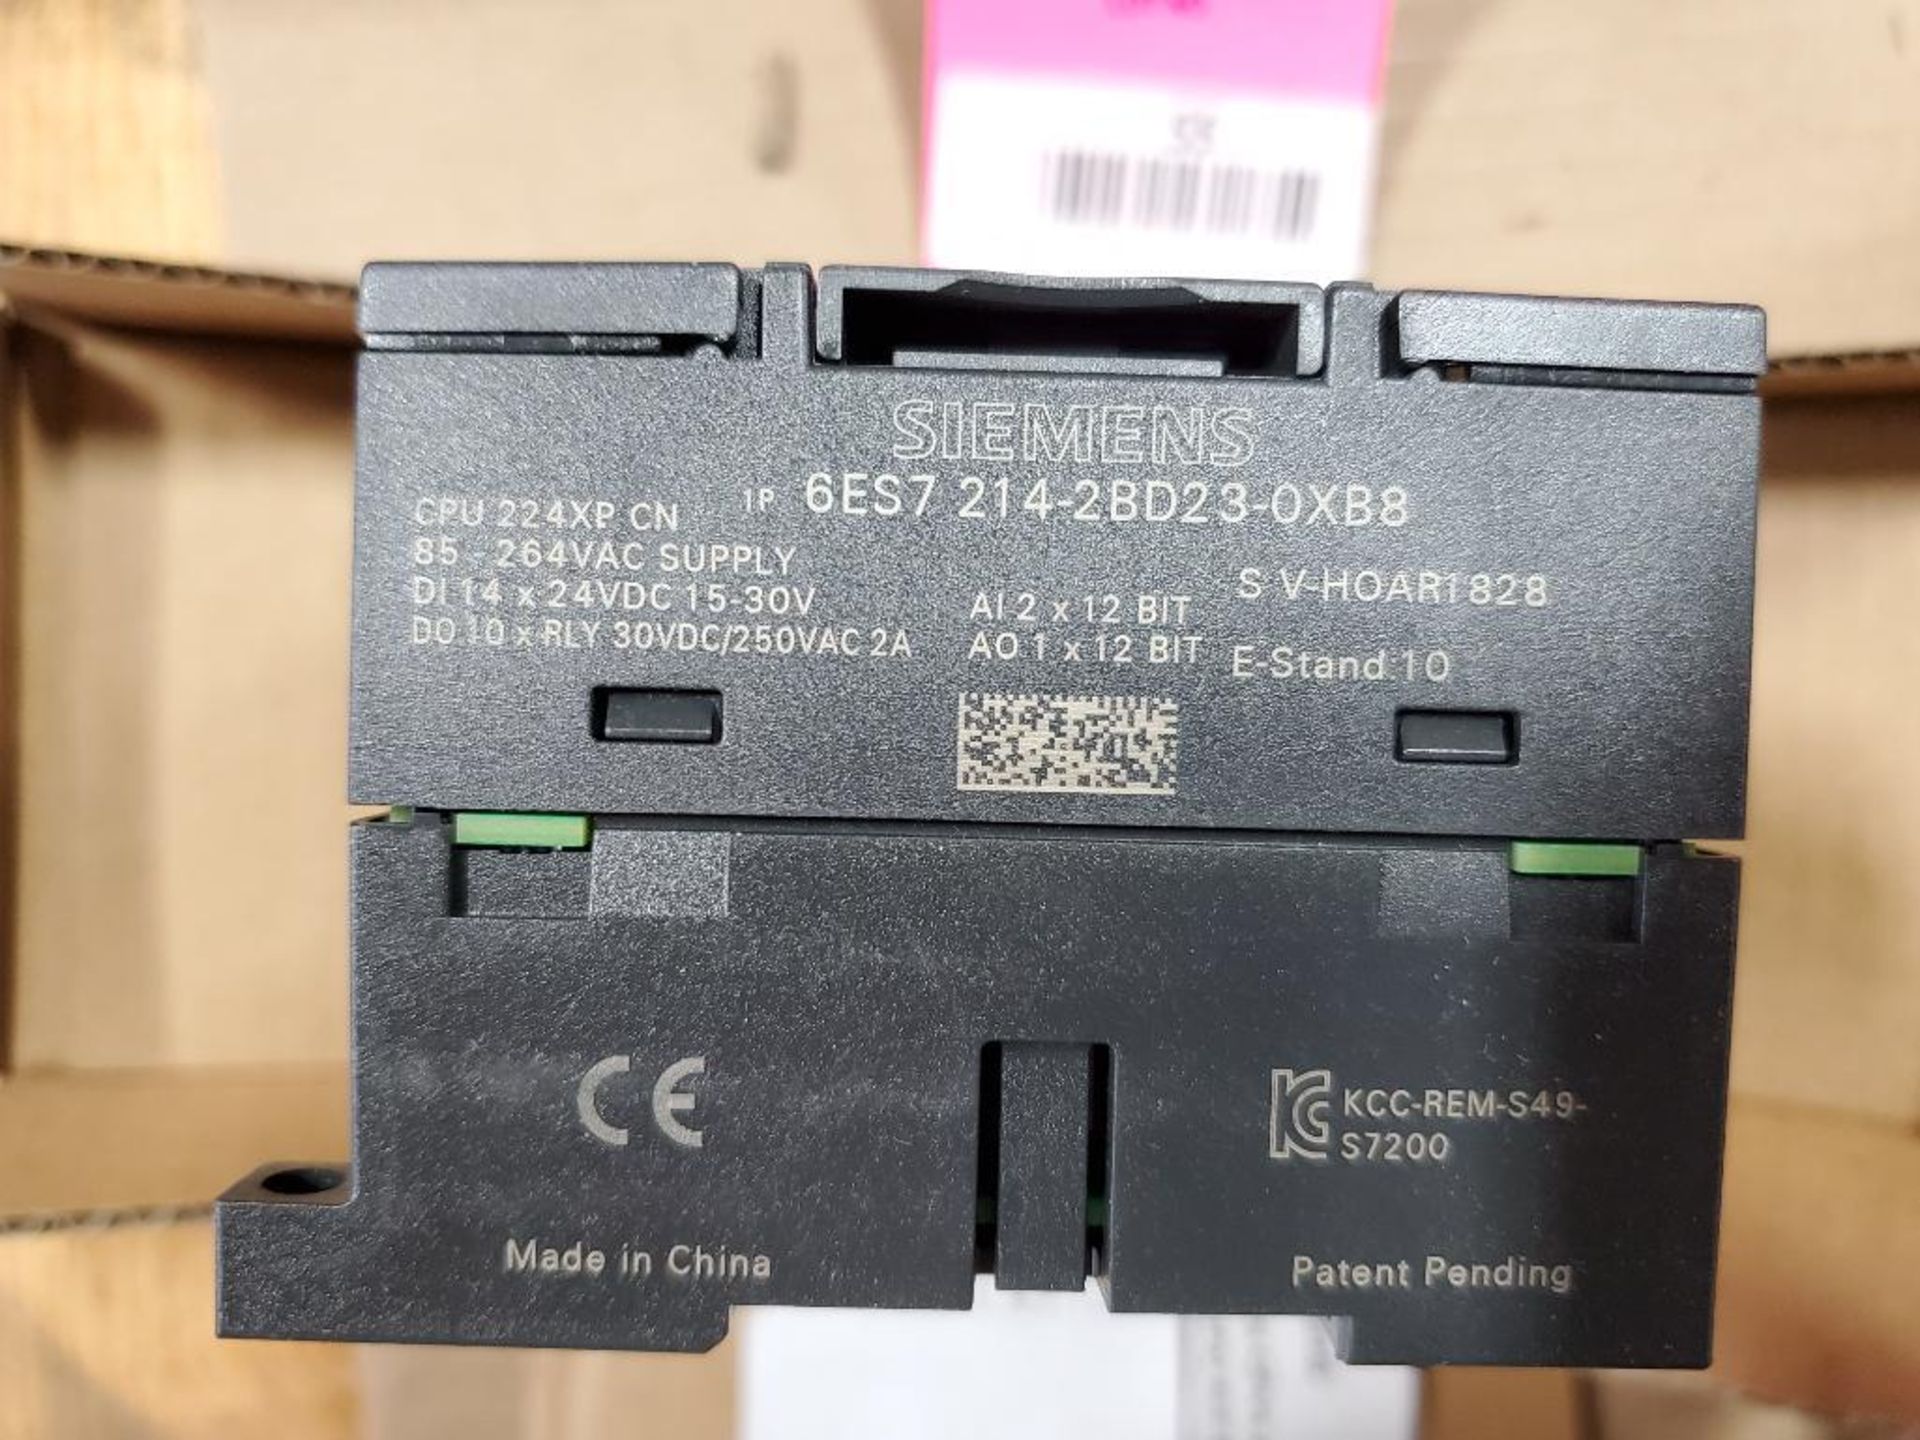 Siemens micro controller. Part number 1P-6ES7-214-2BD23-0XB8. New in box. - Image 4 of 4